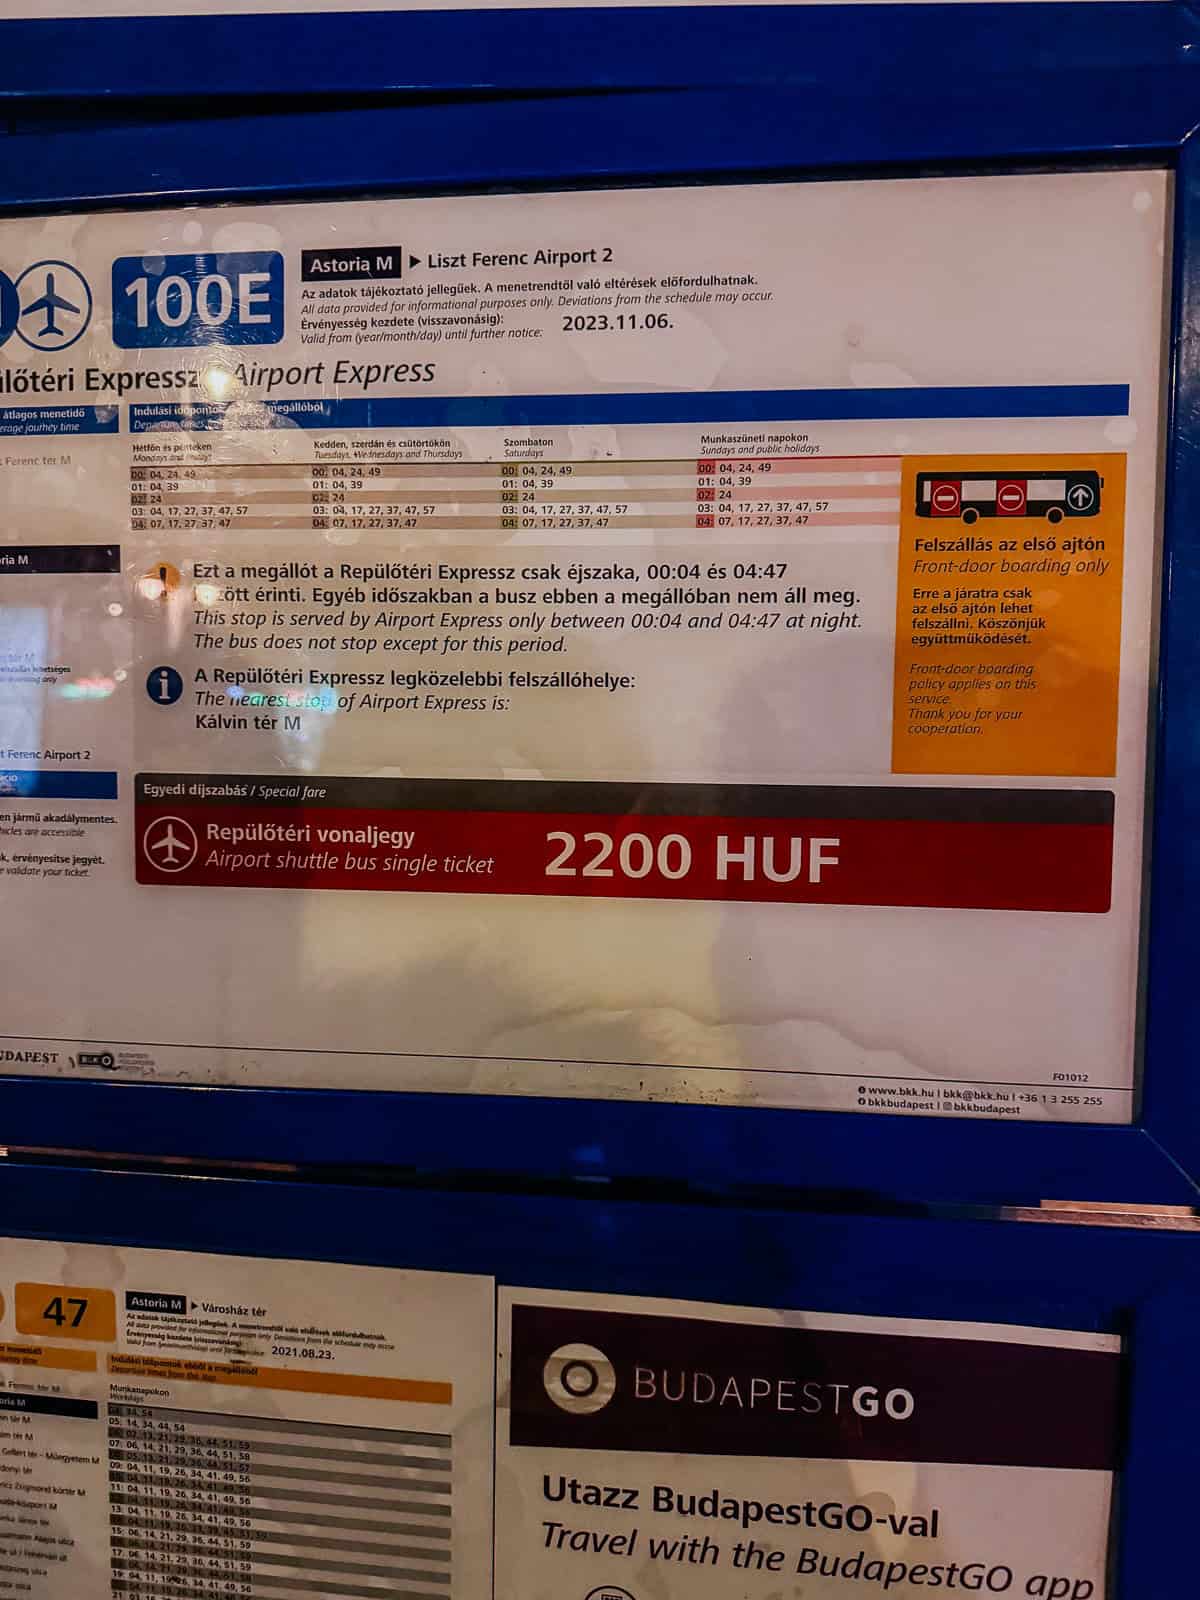 A sign for the 100E Airport Express bus at a bus stop in Budapest, displaying the schedule, fare of 2200 HUF, and instructions for front-door boarding only.